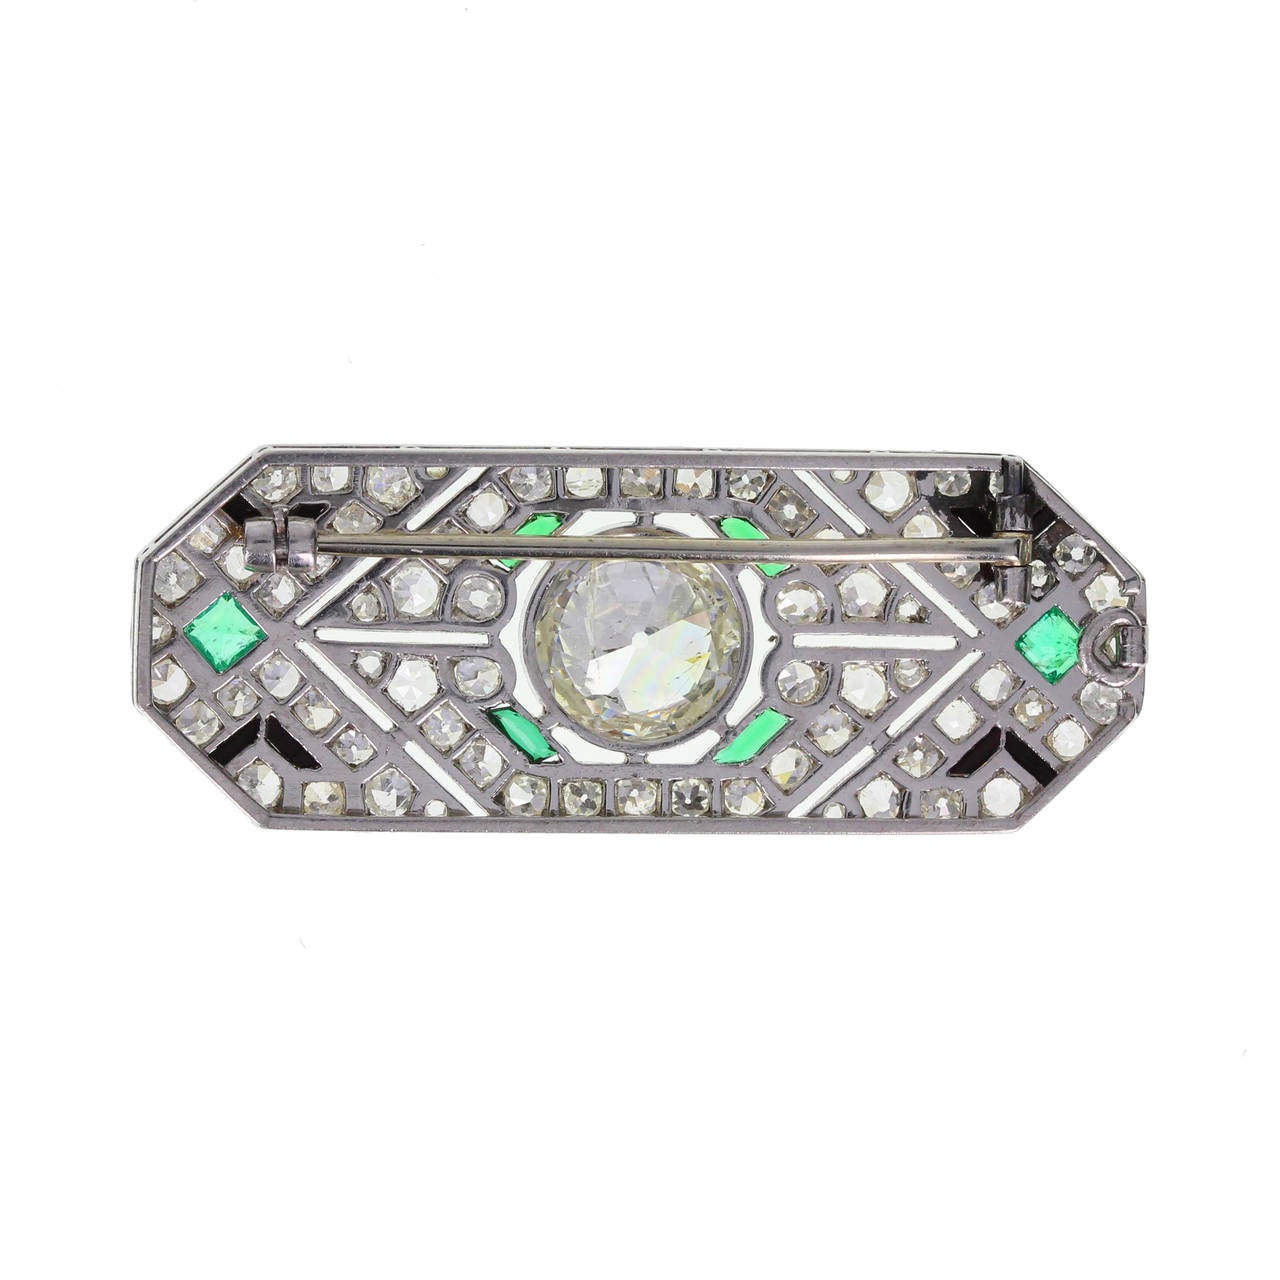 Platinum fashioned in an elongated octagonal shape with pierced detailing. Central 2.75 carat, I colour, P1 clarity diamond in a rub over setting, surrounded by pave set old-cut diamonds in a geometric pattern, accented with square-cut emeralds and